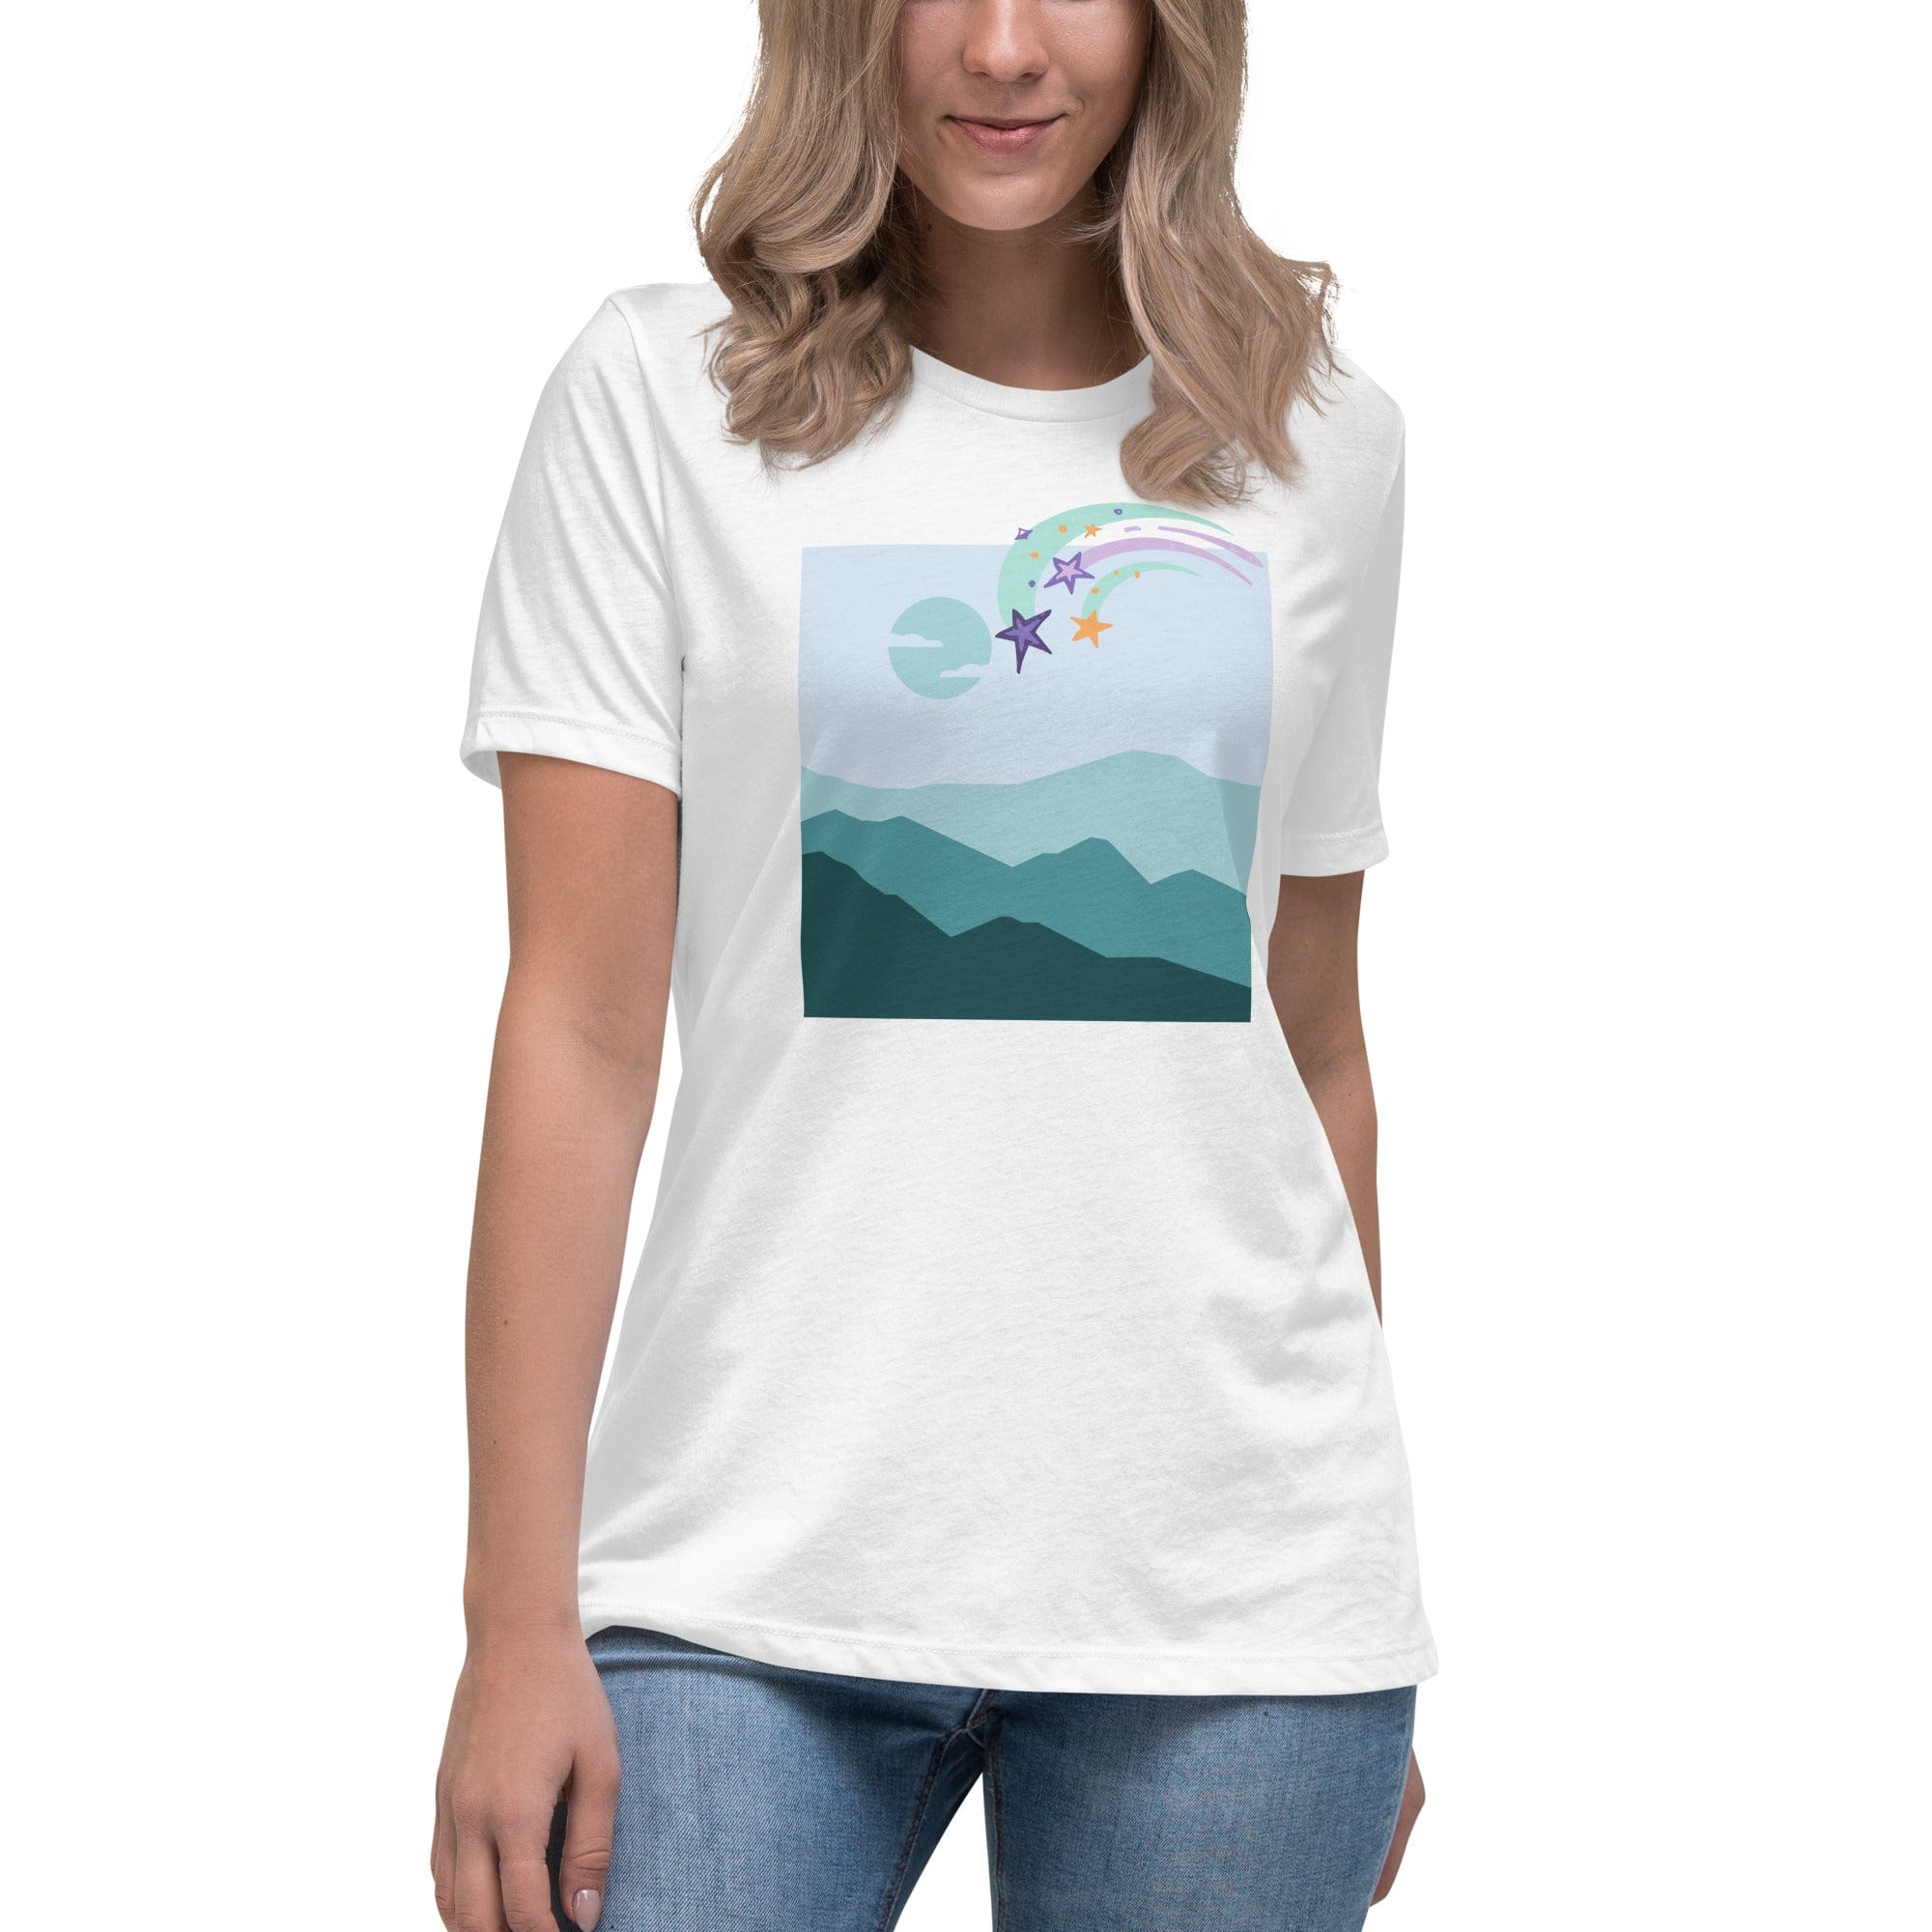 Spruced Roost White / S Shooting Stars - Women's Relaxed T-Shirt - S-3XL